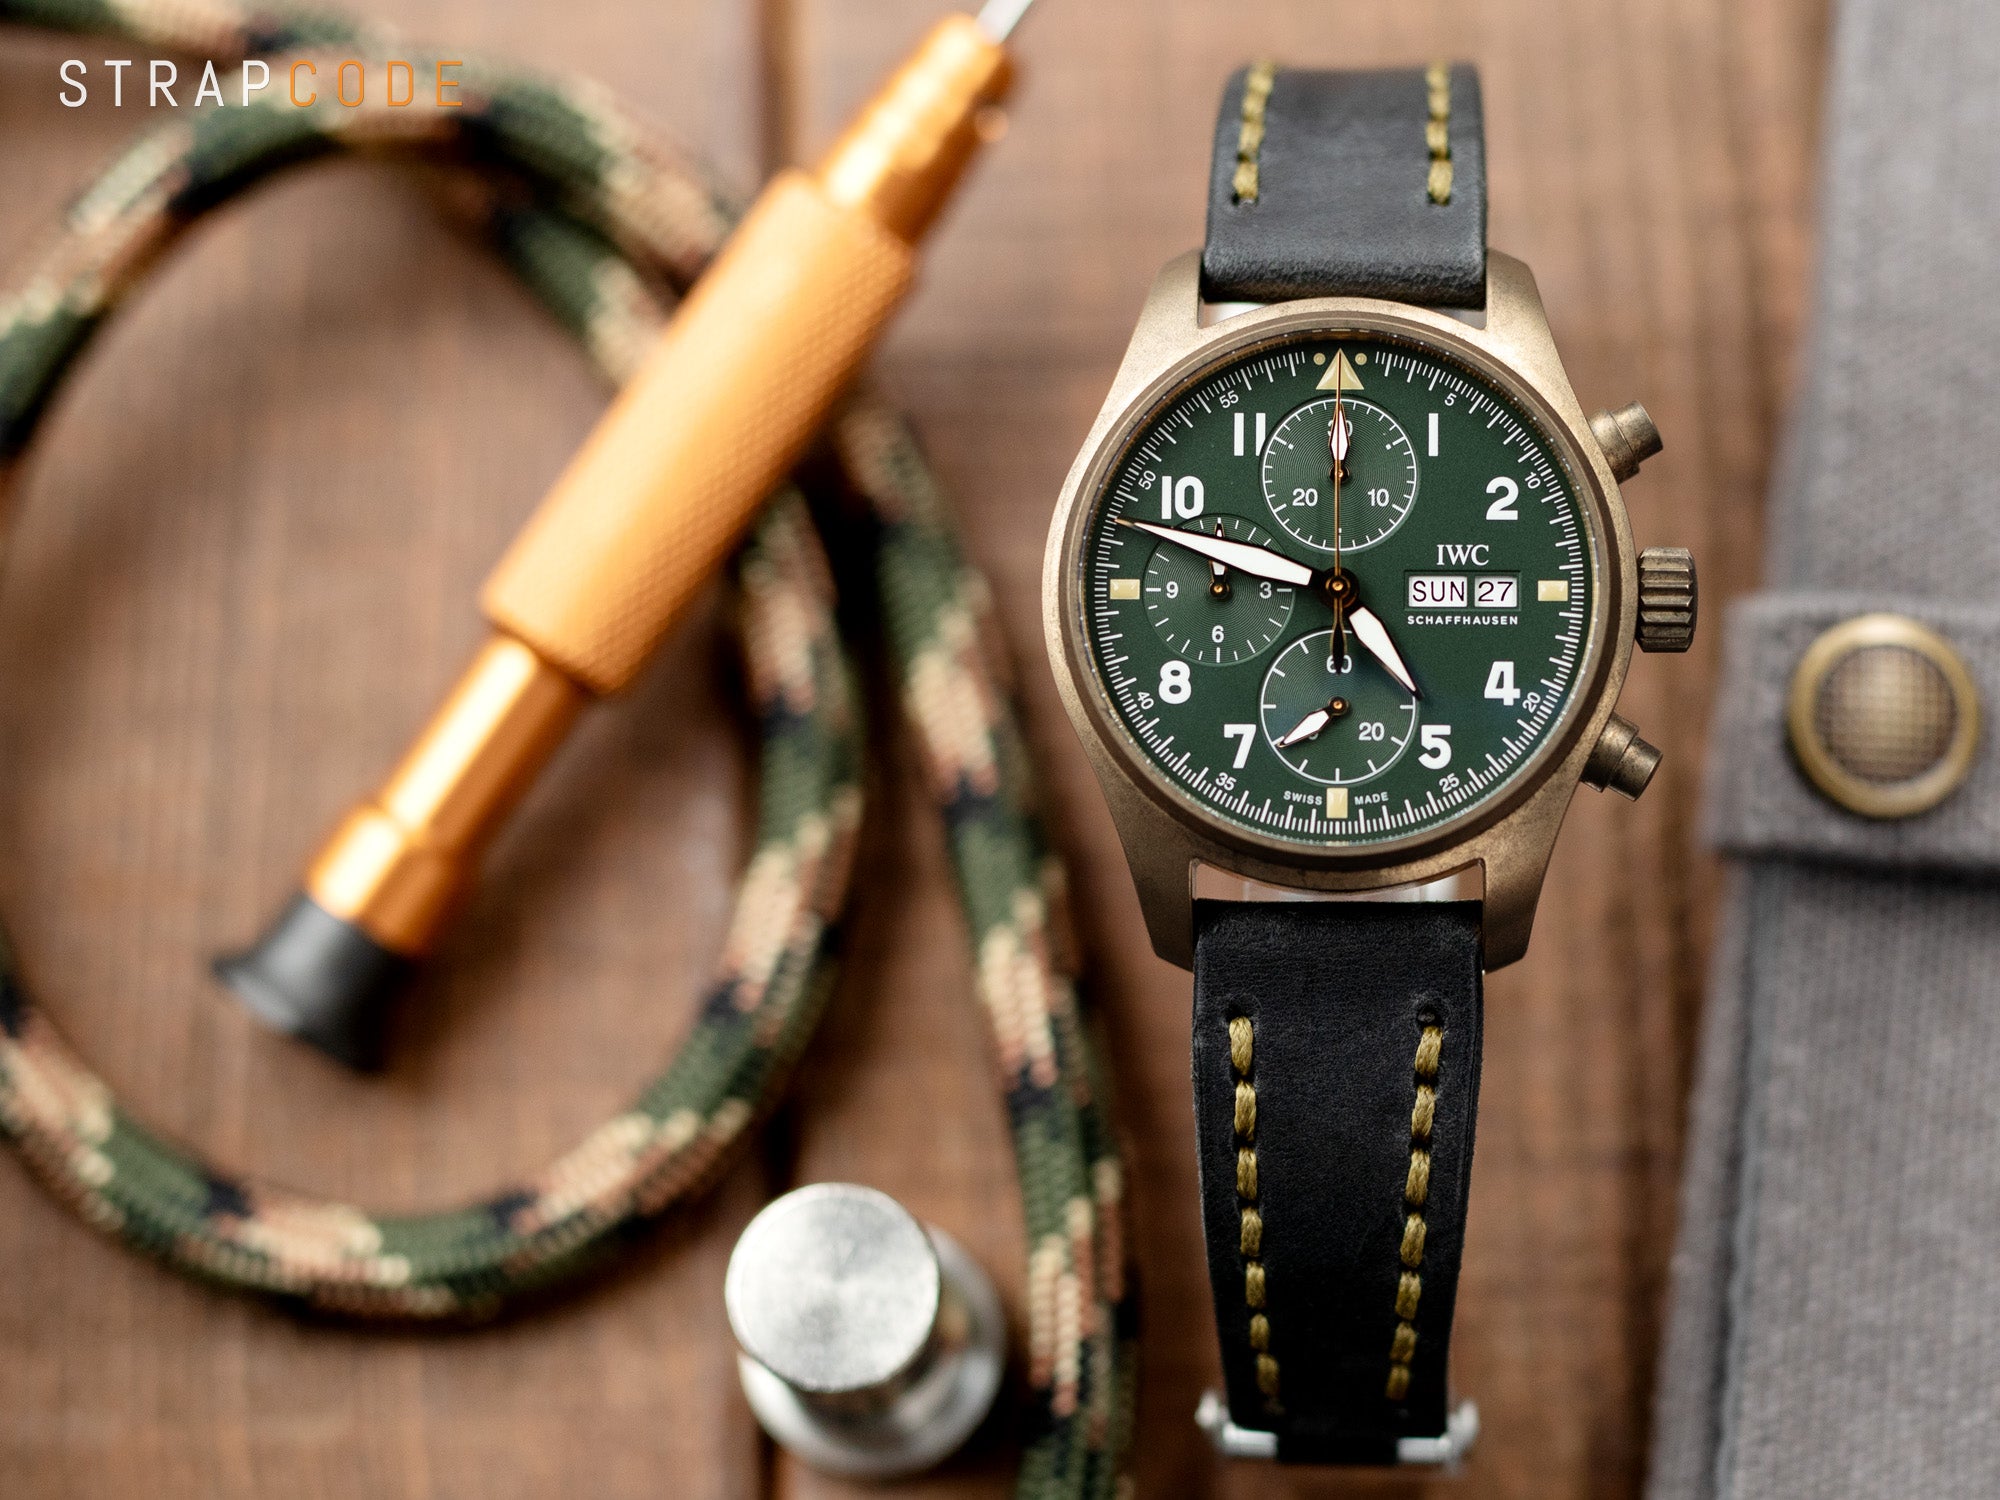 IWC Pilot Spitfire Chronograph Bronze leather watch band by Strapcode